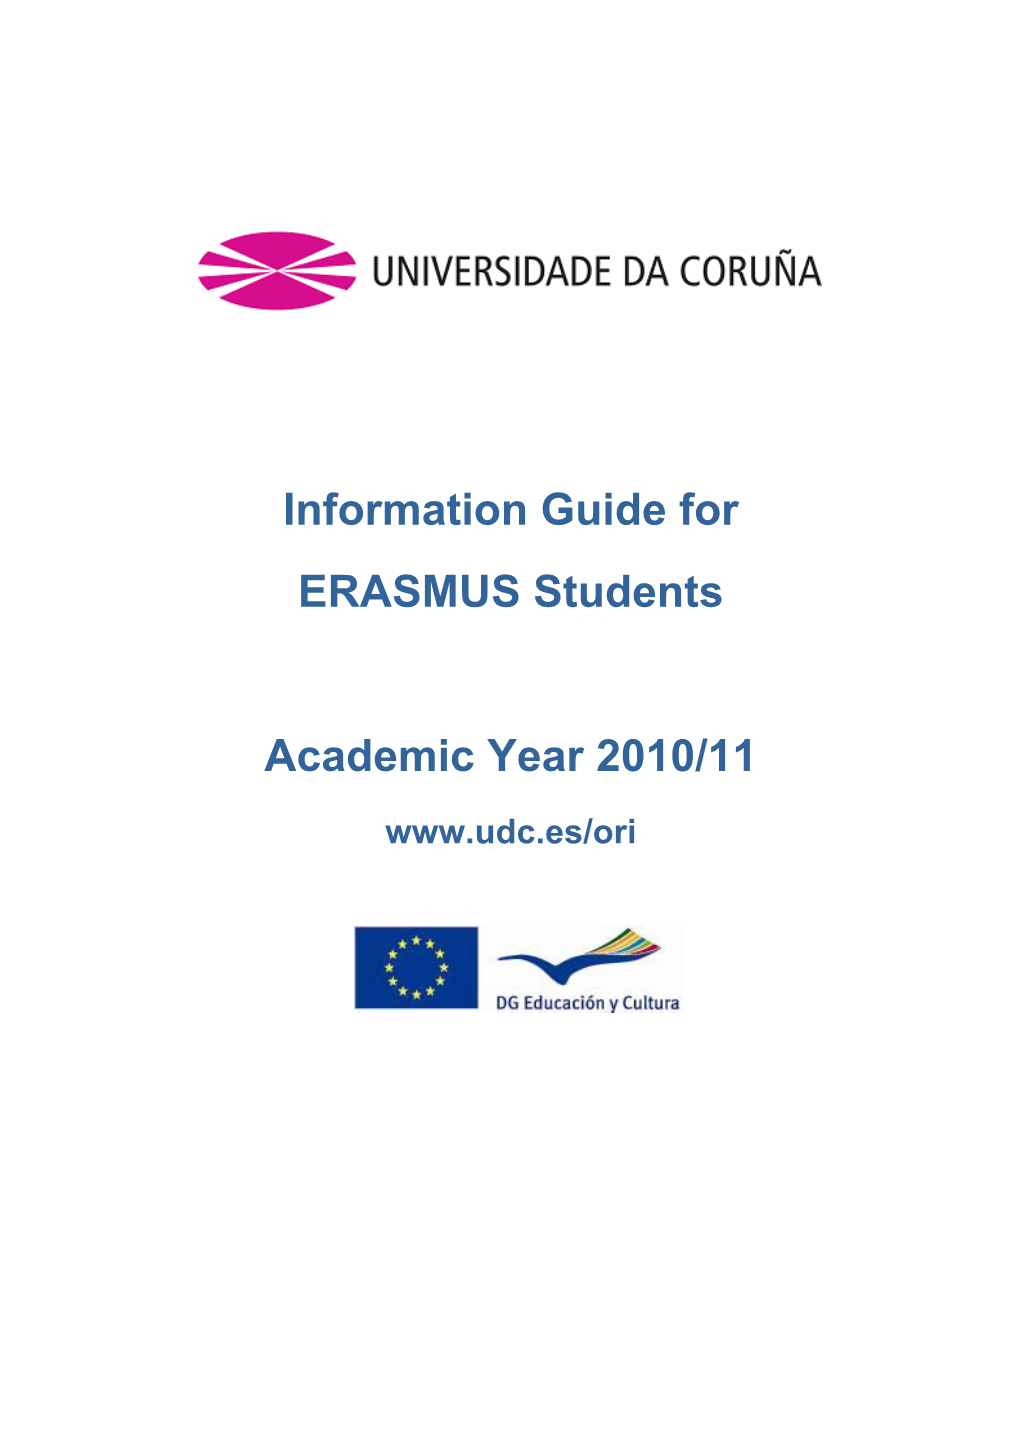 Information Guide for ERASMUS Students Academic Year